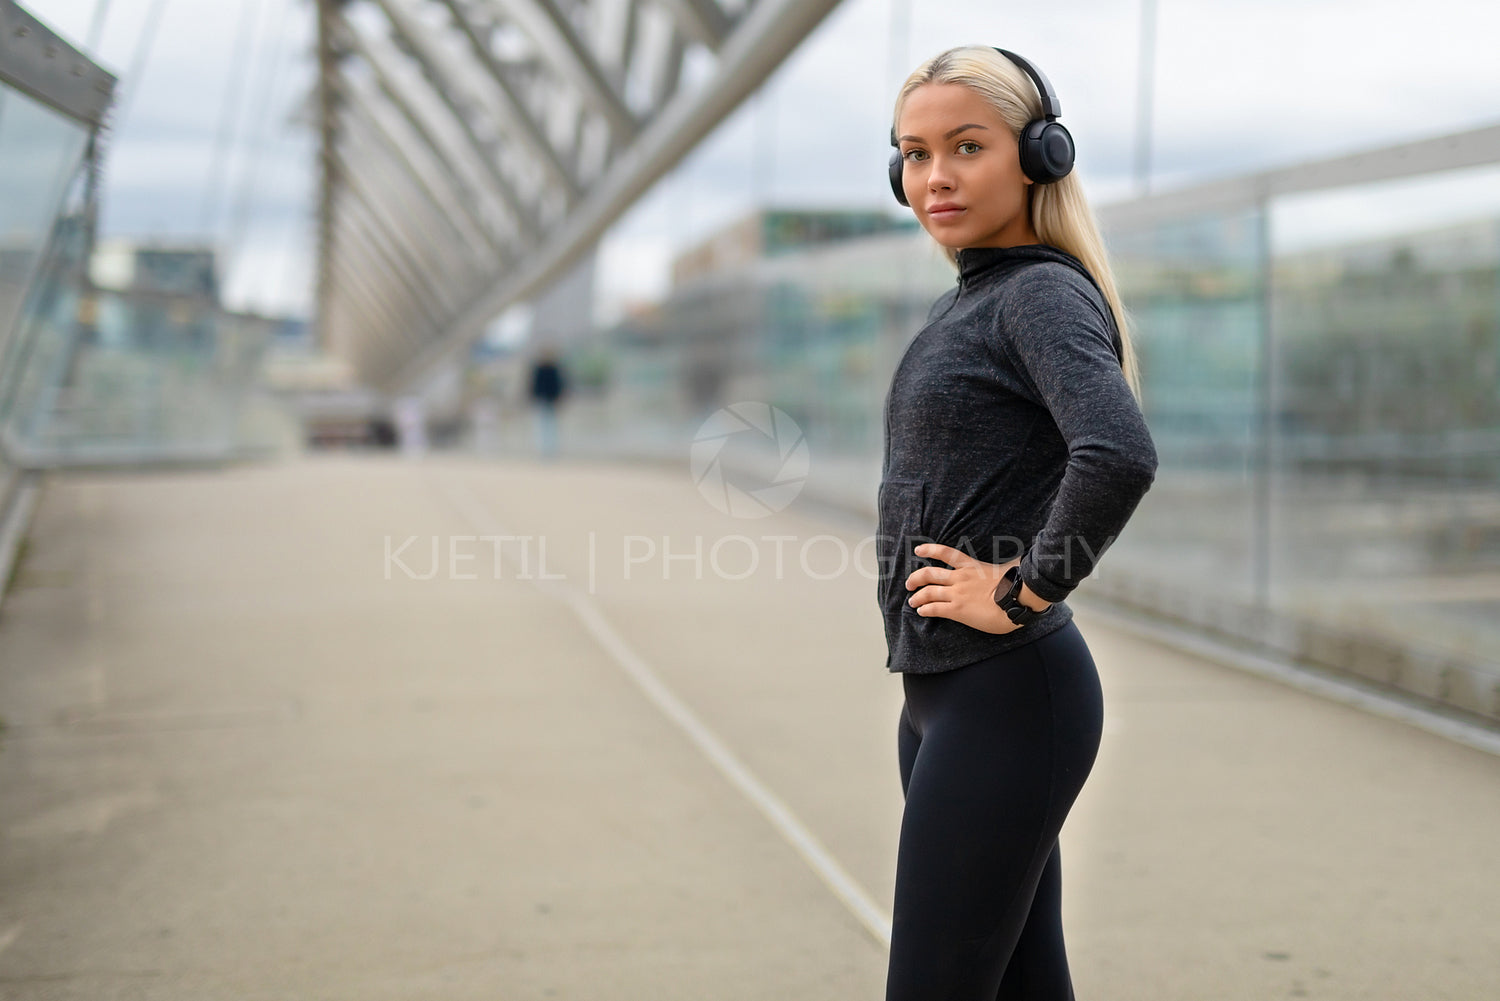 Smiling Woman in Black Workout Outfit Listen To Music on Headphones